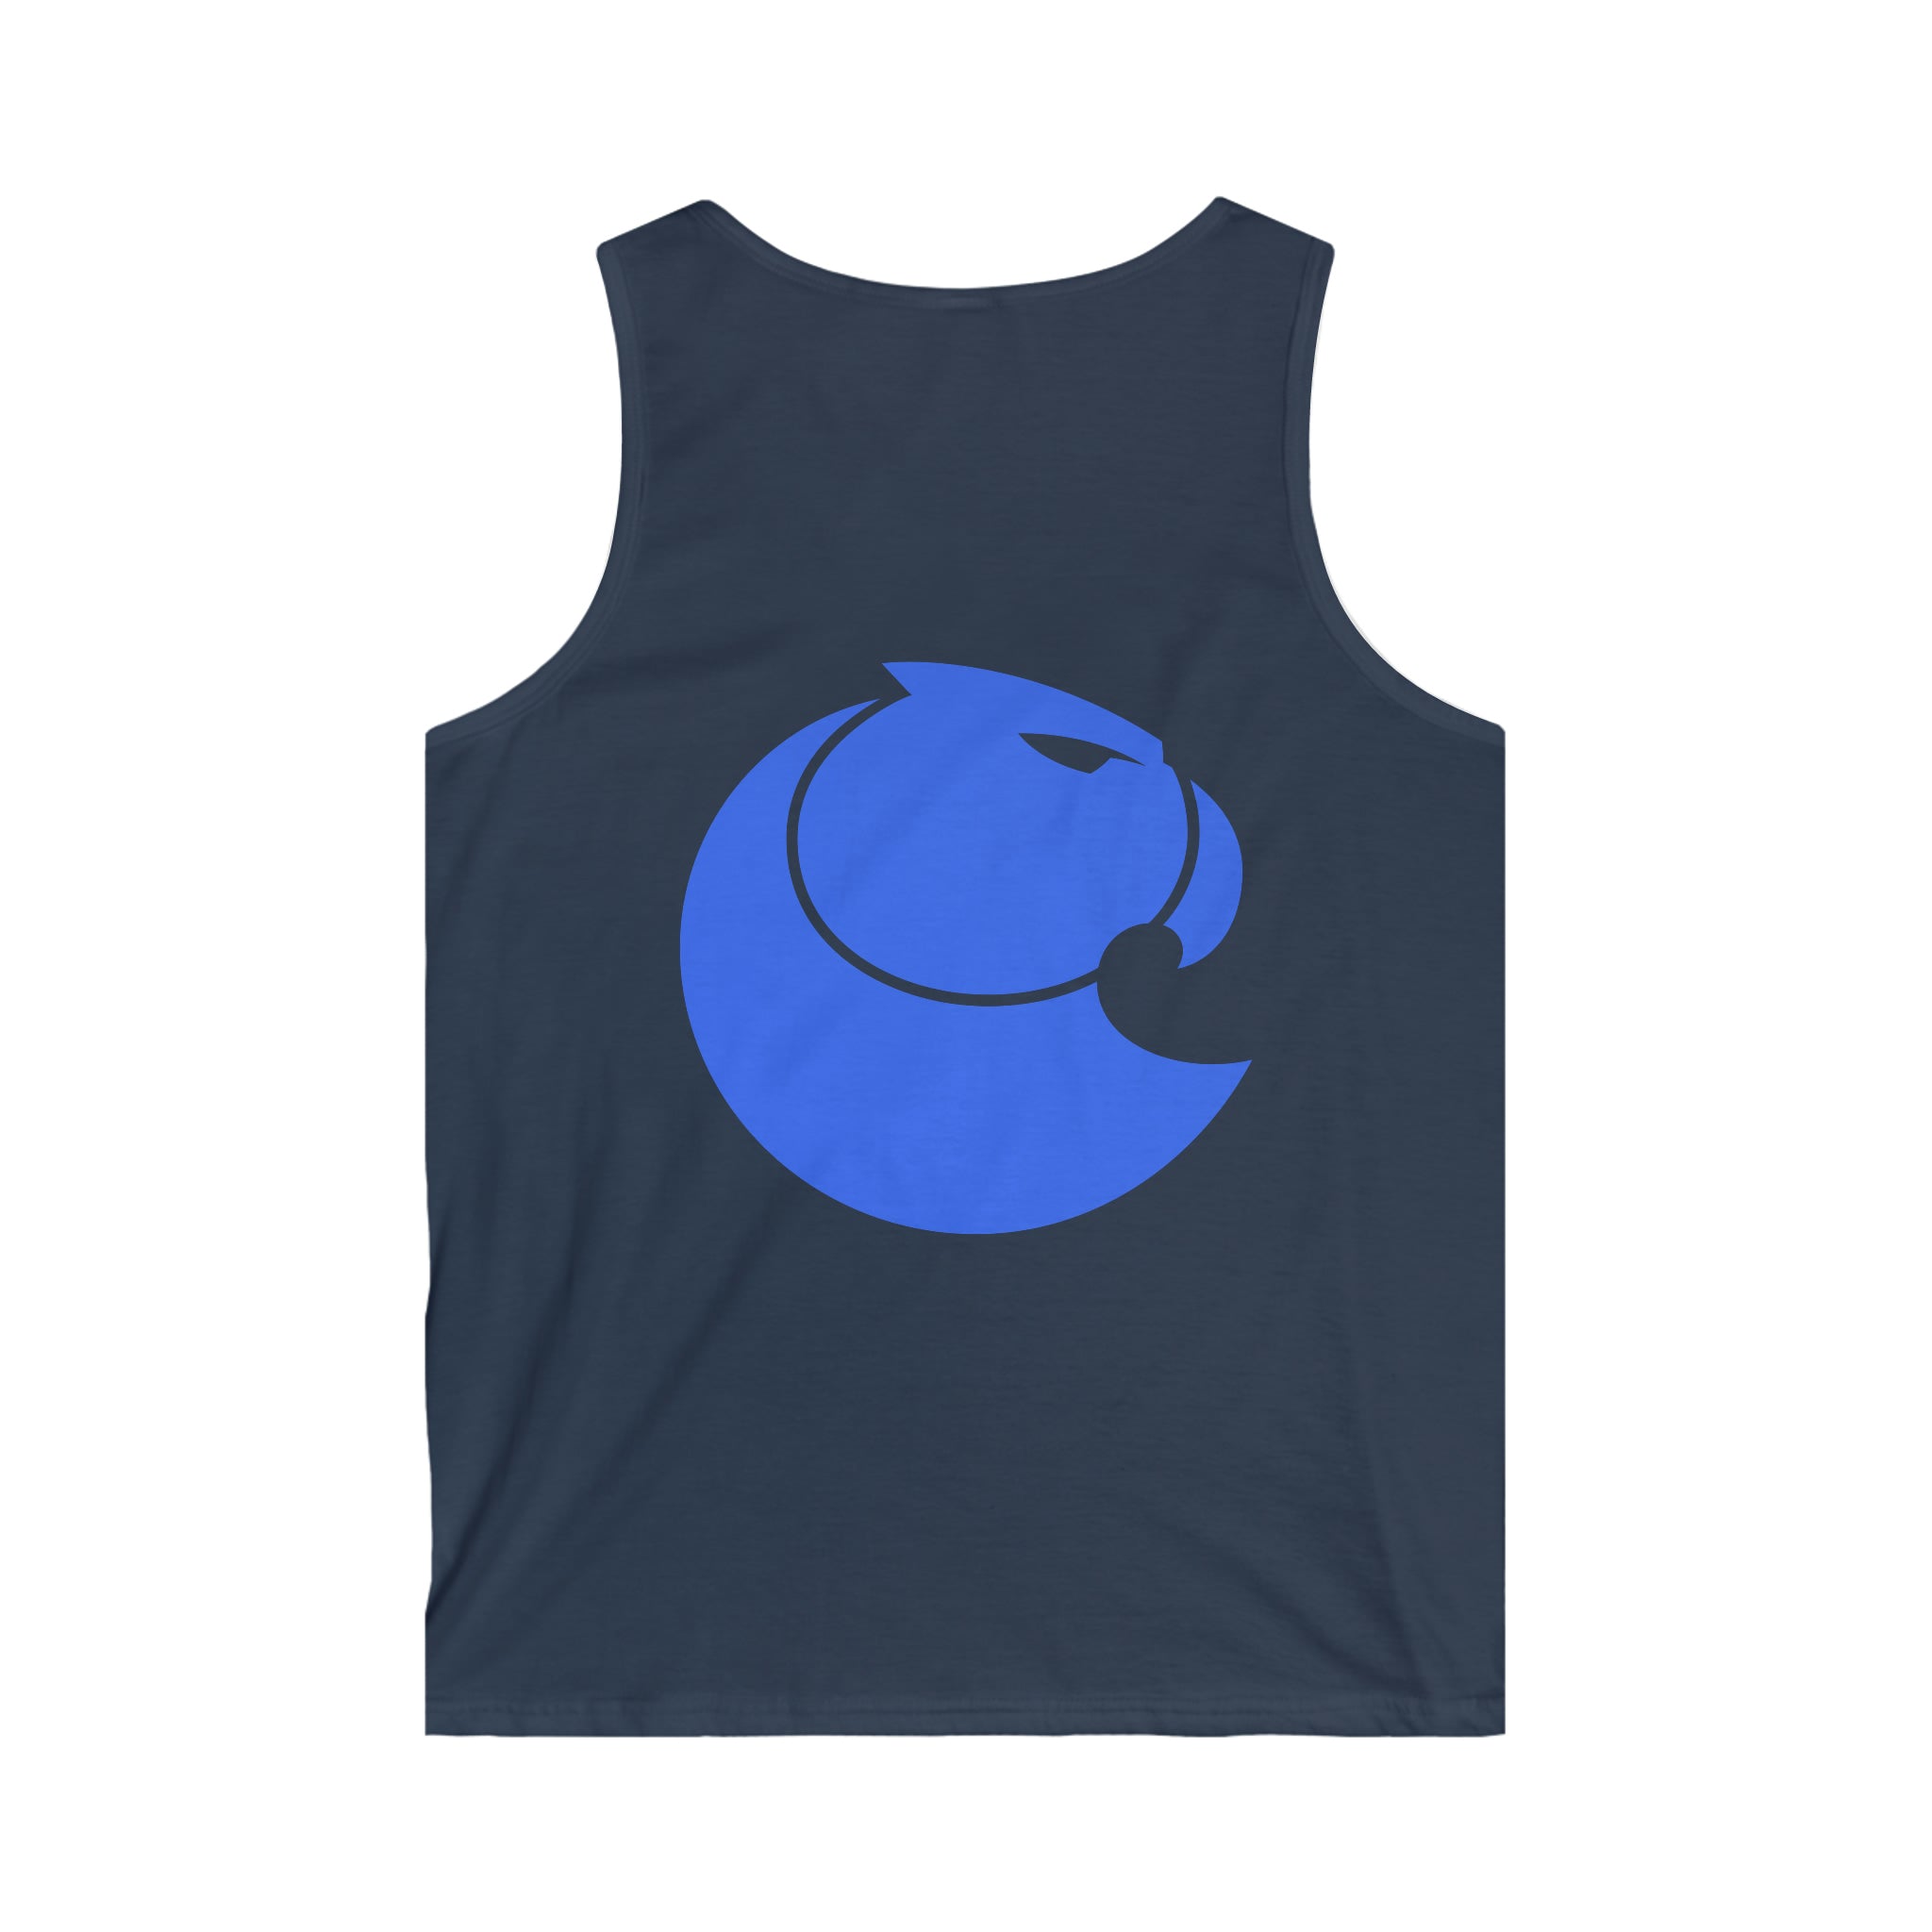 Men's Softstyle Tank Top - ANT - Aragon